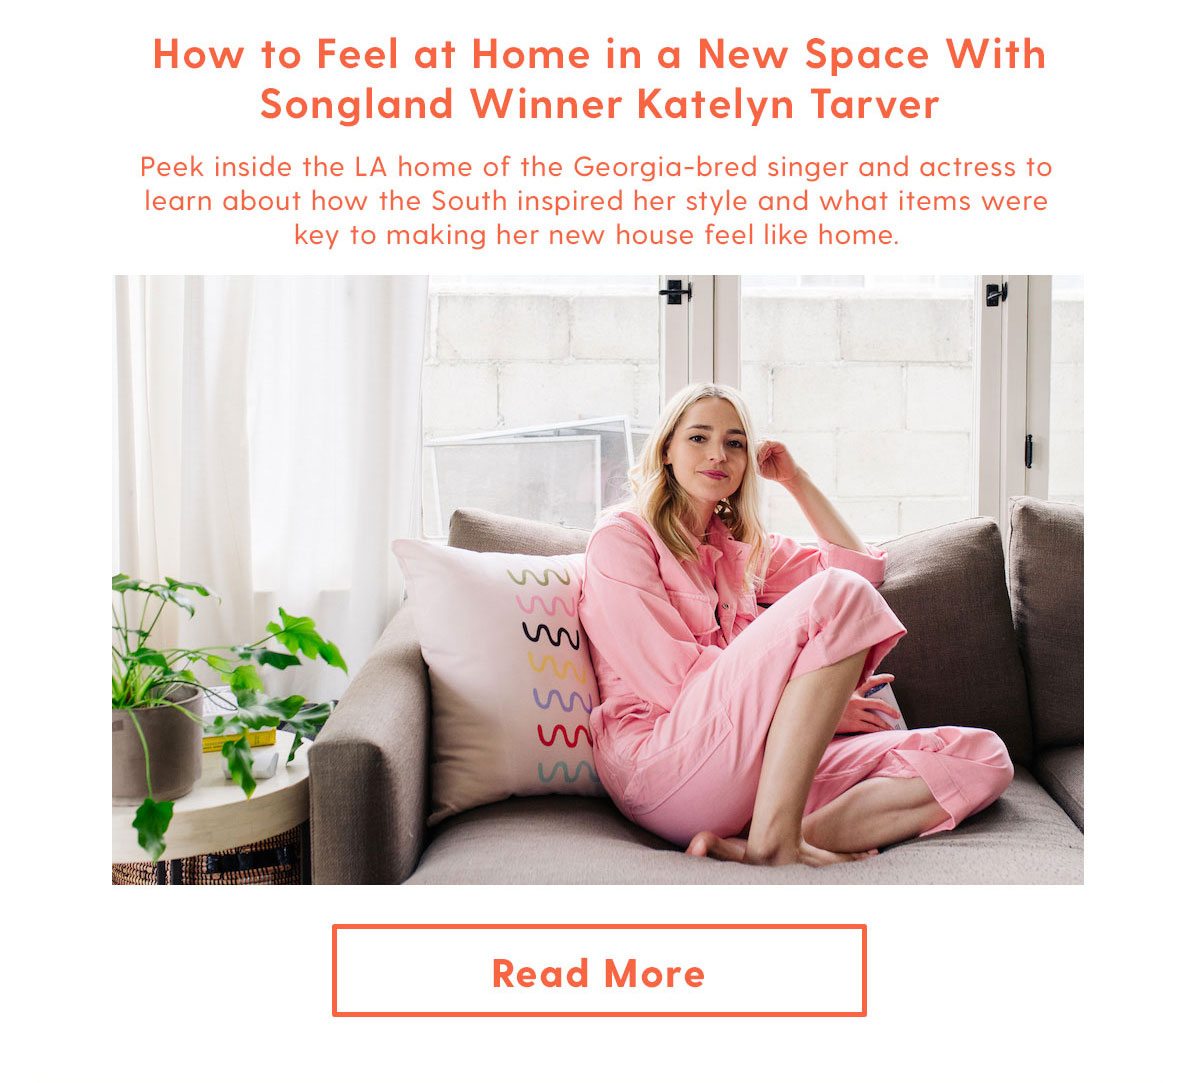 How to Feel at Home in a New Space With Songland Winner Katelyn Tarver | Peek inside the LA home of the Georgia-bred singer and actress to learn about how the South inspired her style and what items were key to making her new house feel like home.